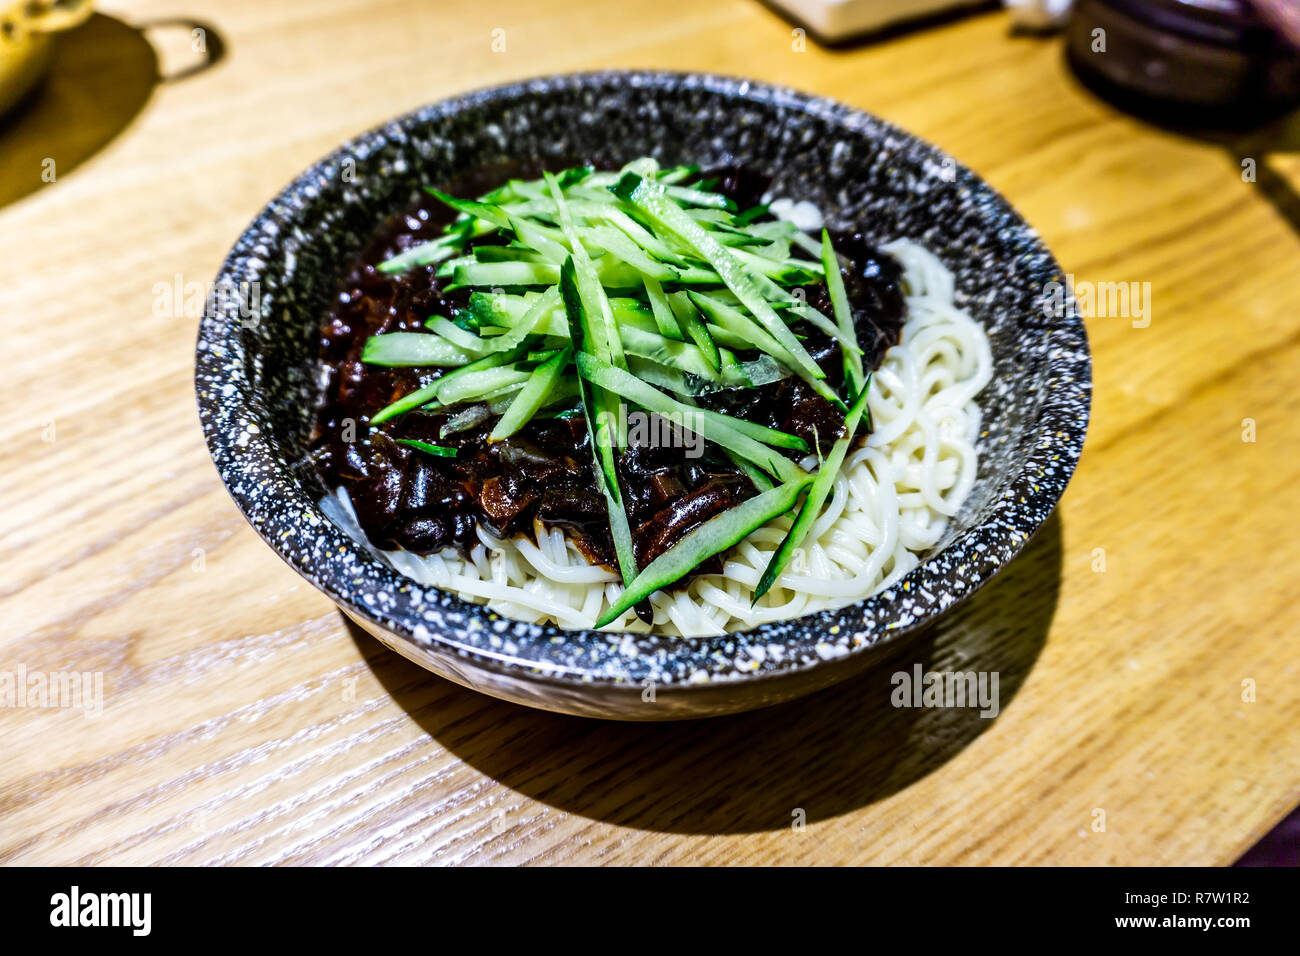 Korean Jajangmyeon Dish Served in a Stone Bowl Garnished with Cucumber Stock Photo